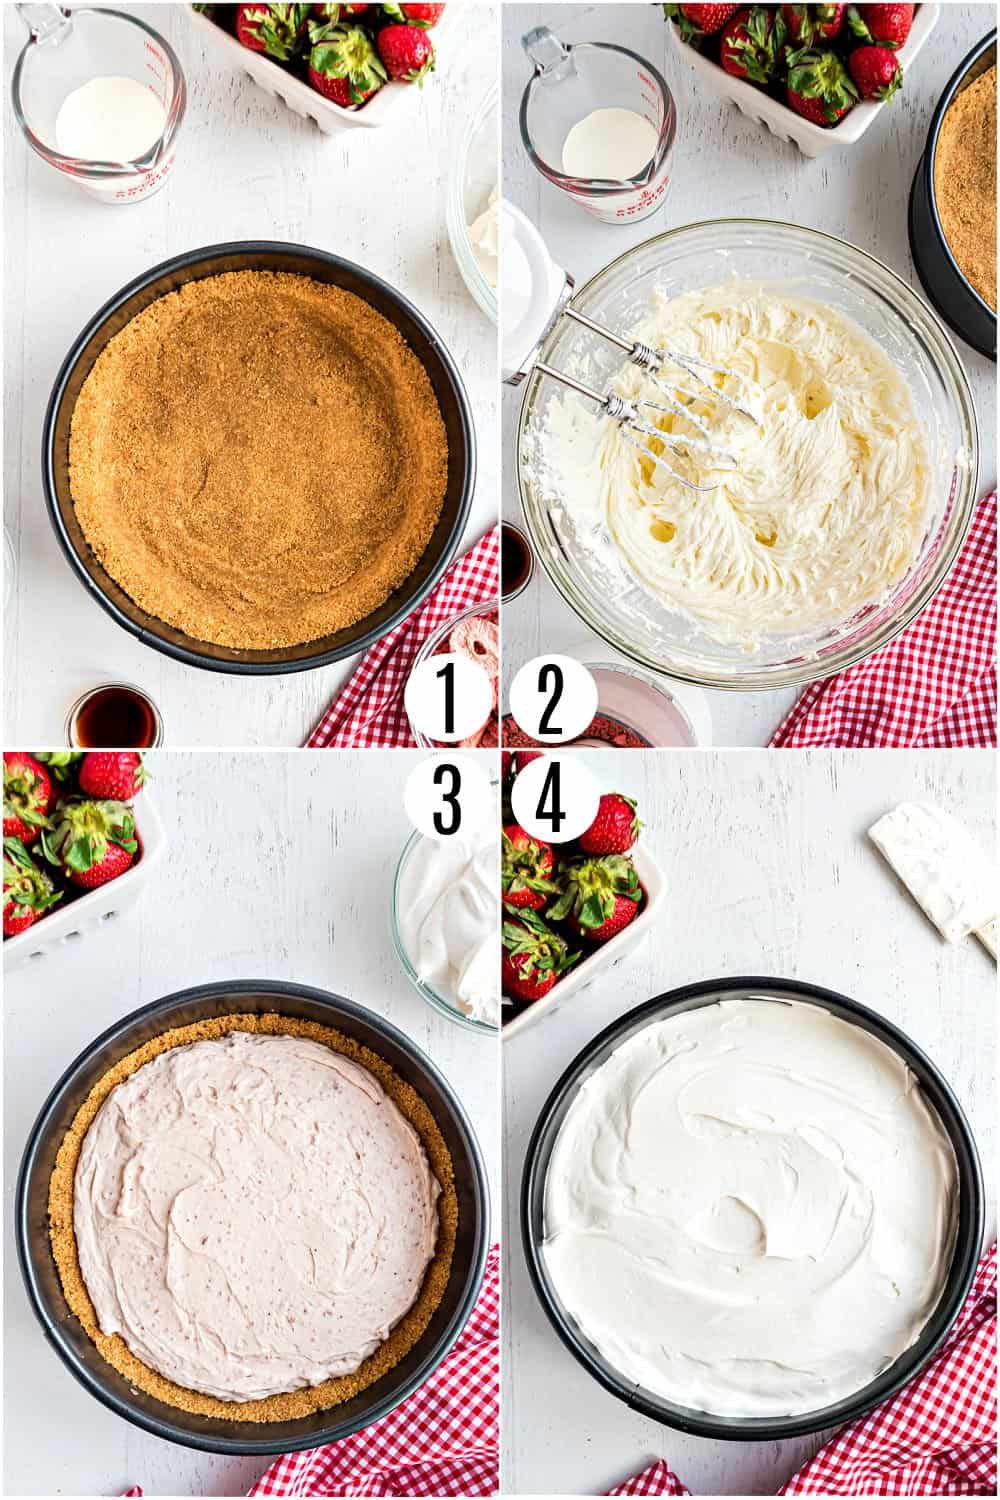 Step by step photos showing how to make no bake strawberry cheesecake.